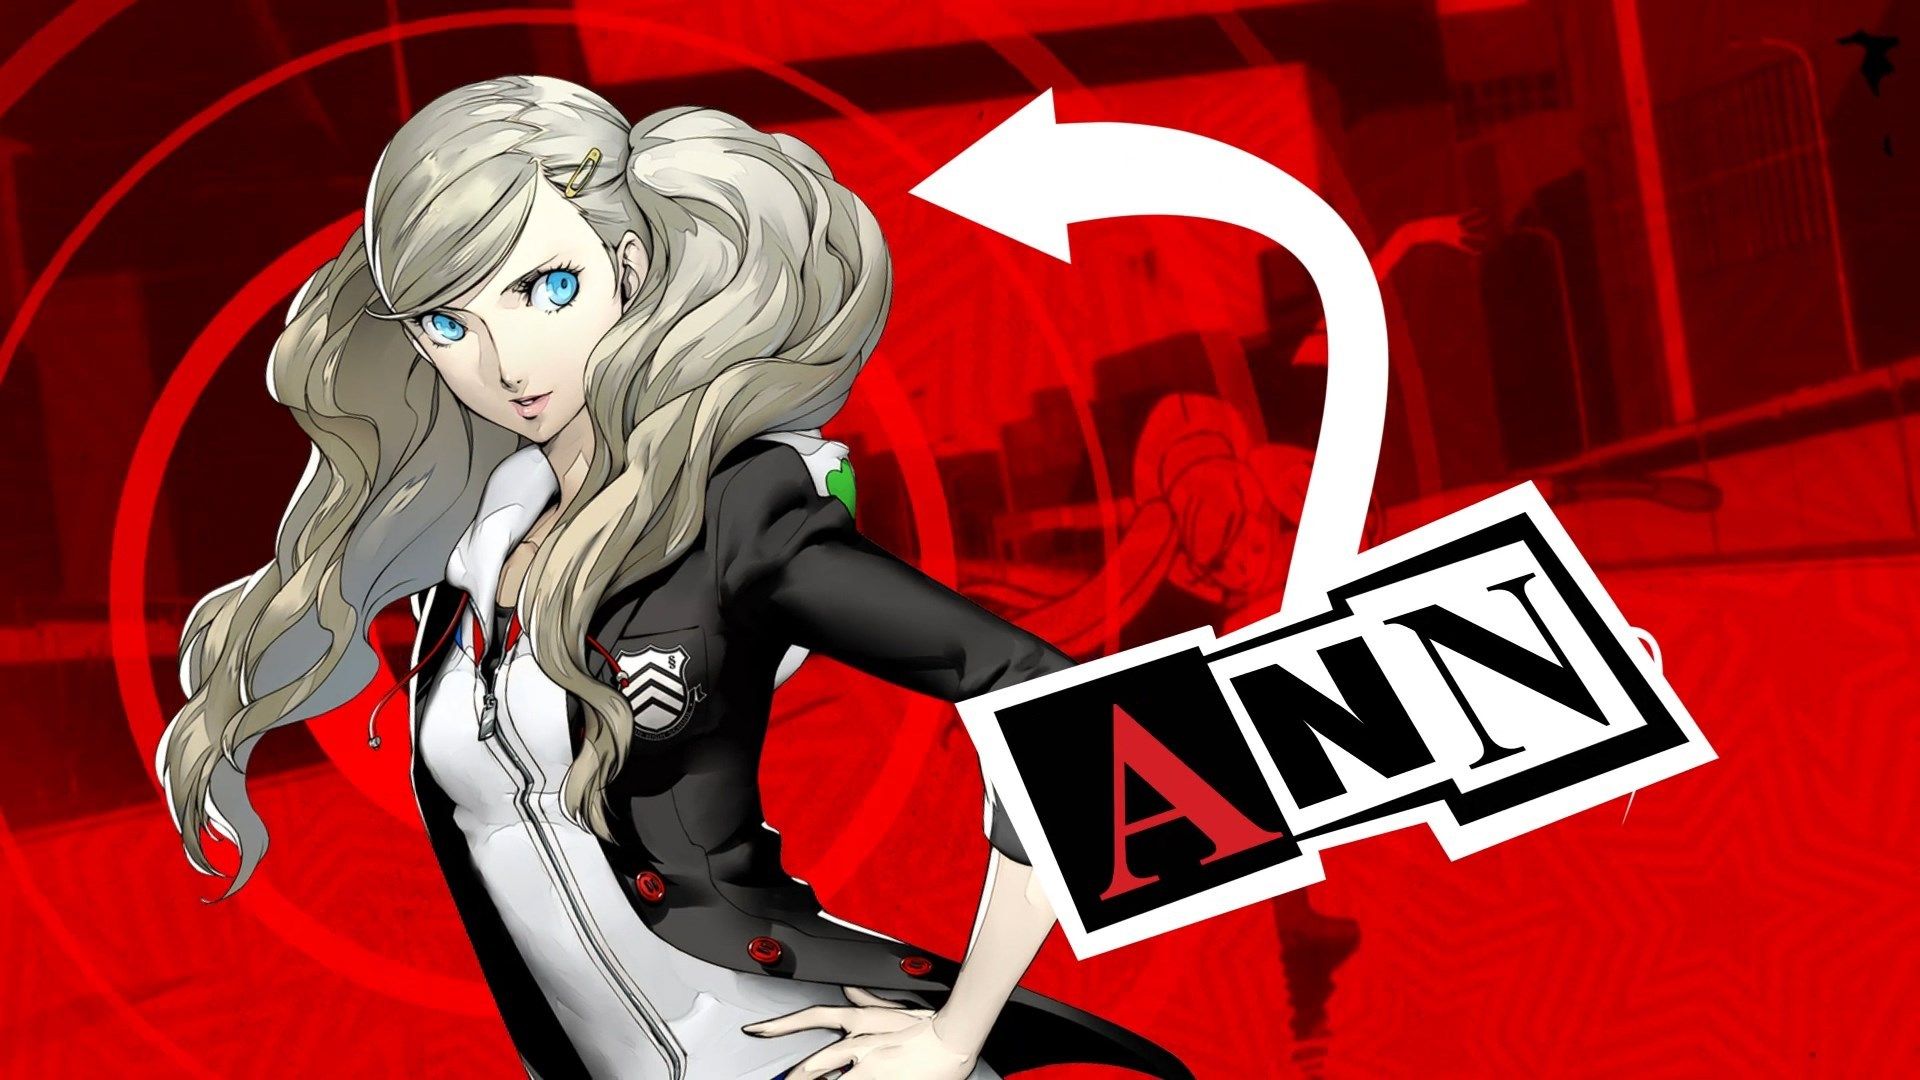 Persona 5: Ann Takamaki Introduction and Interview